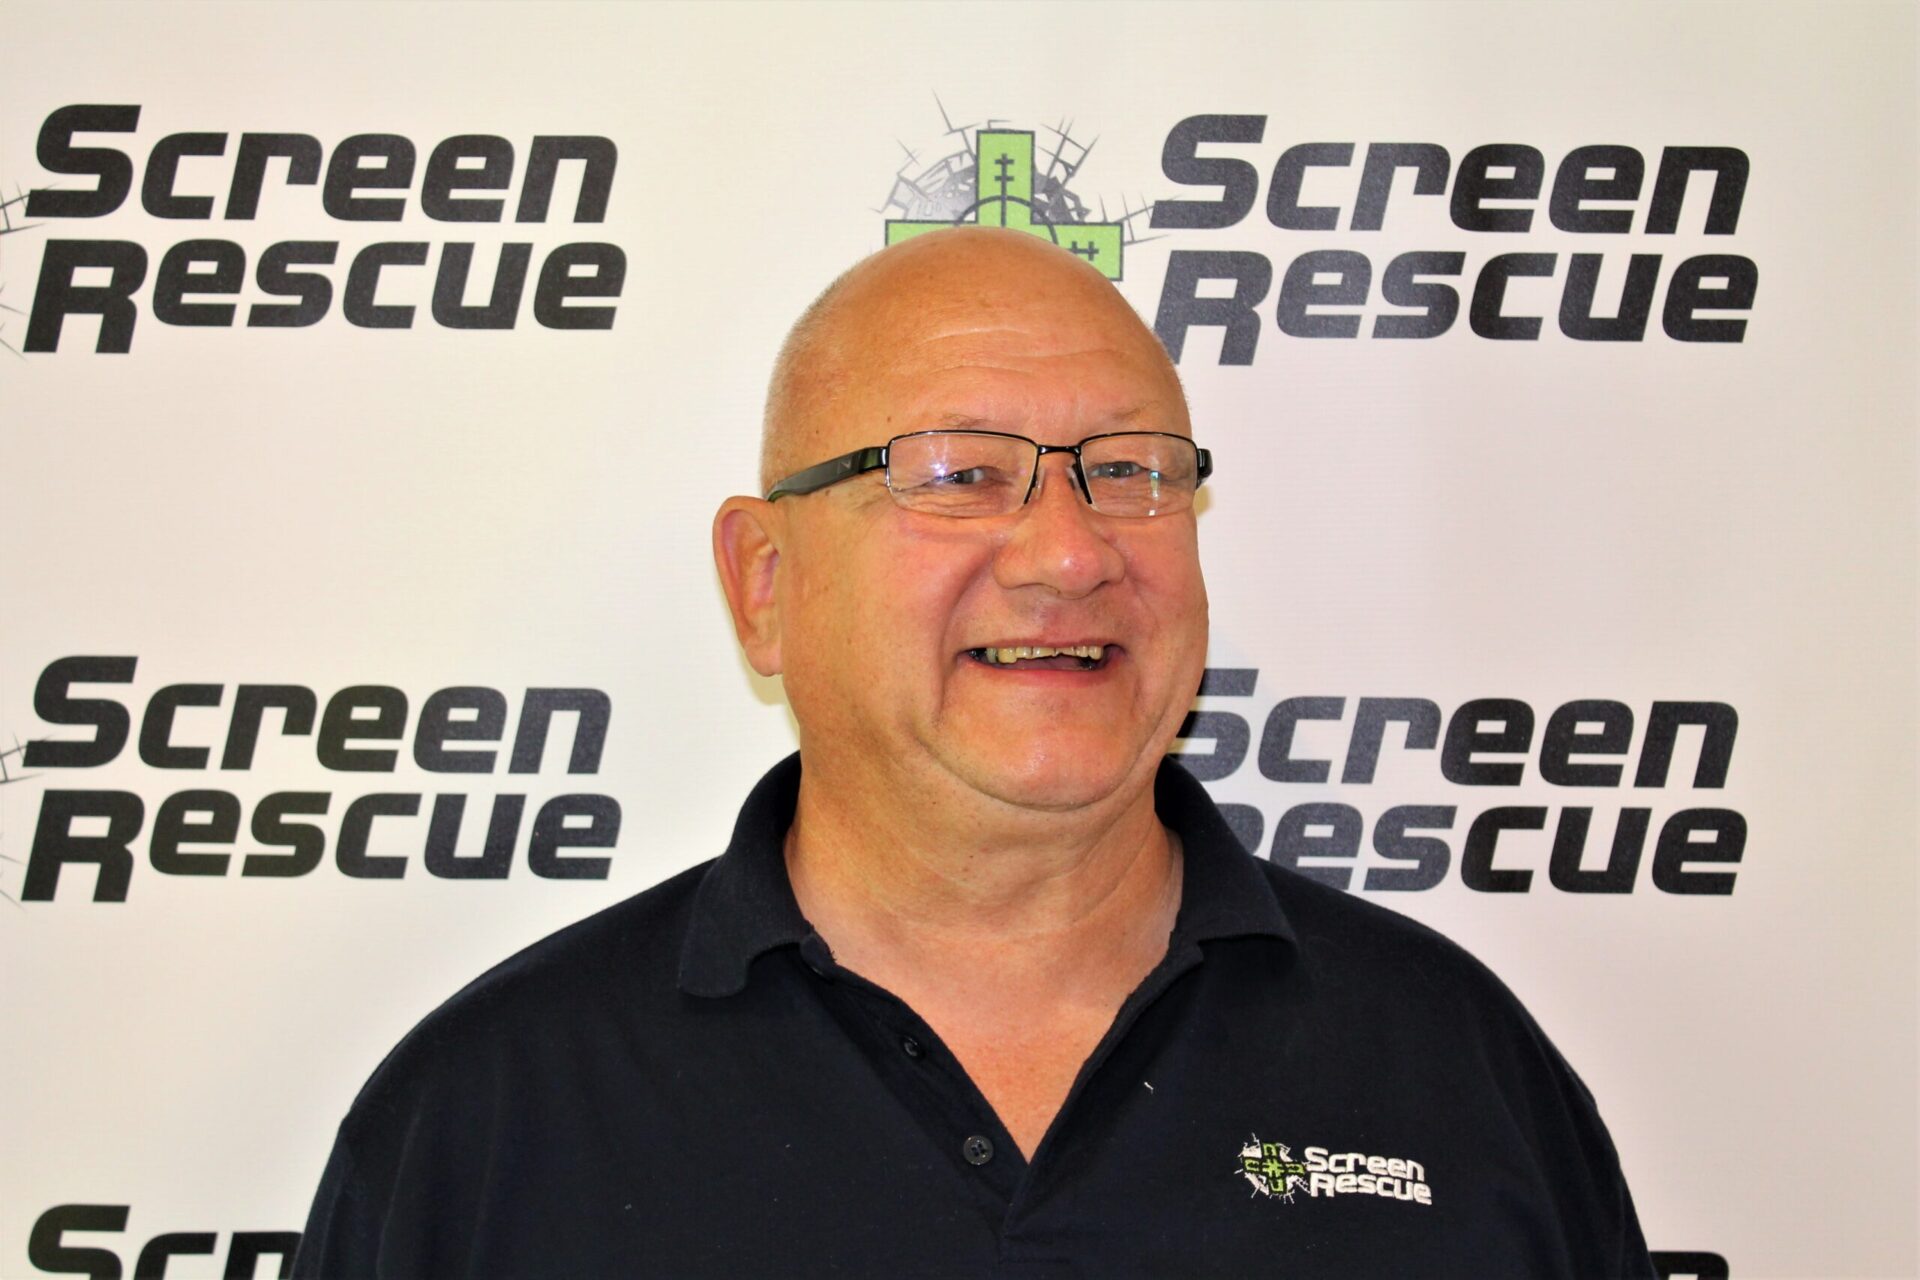 One year on in business, with Screen Rescue franchisee, Keith Harrison…